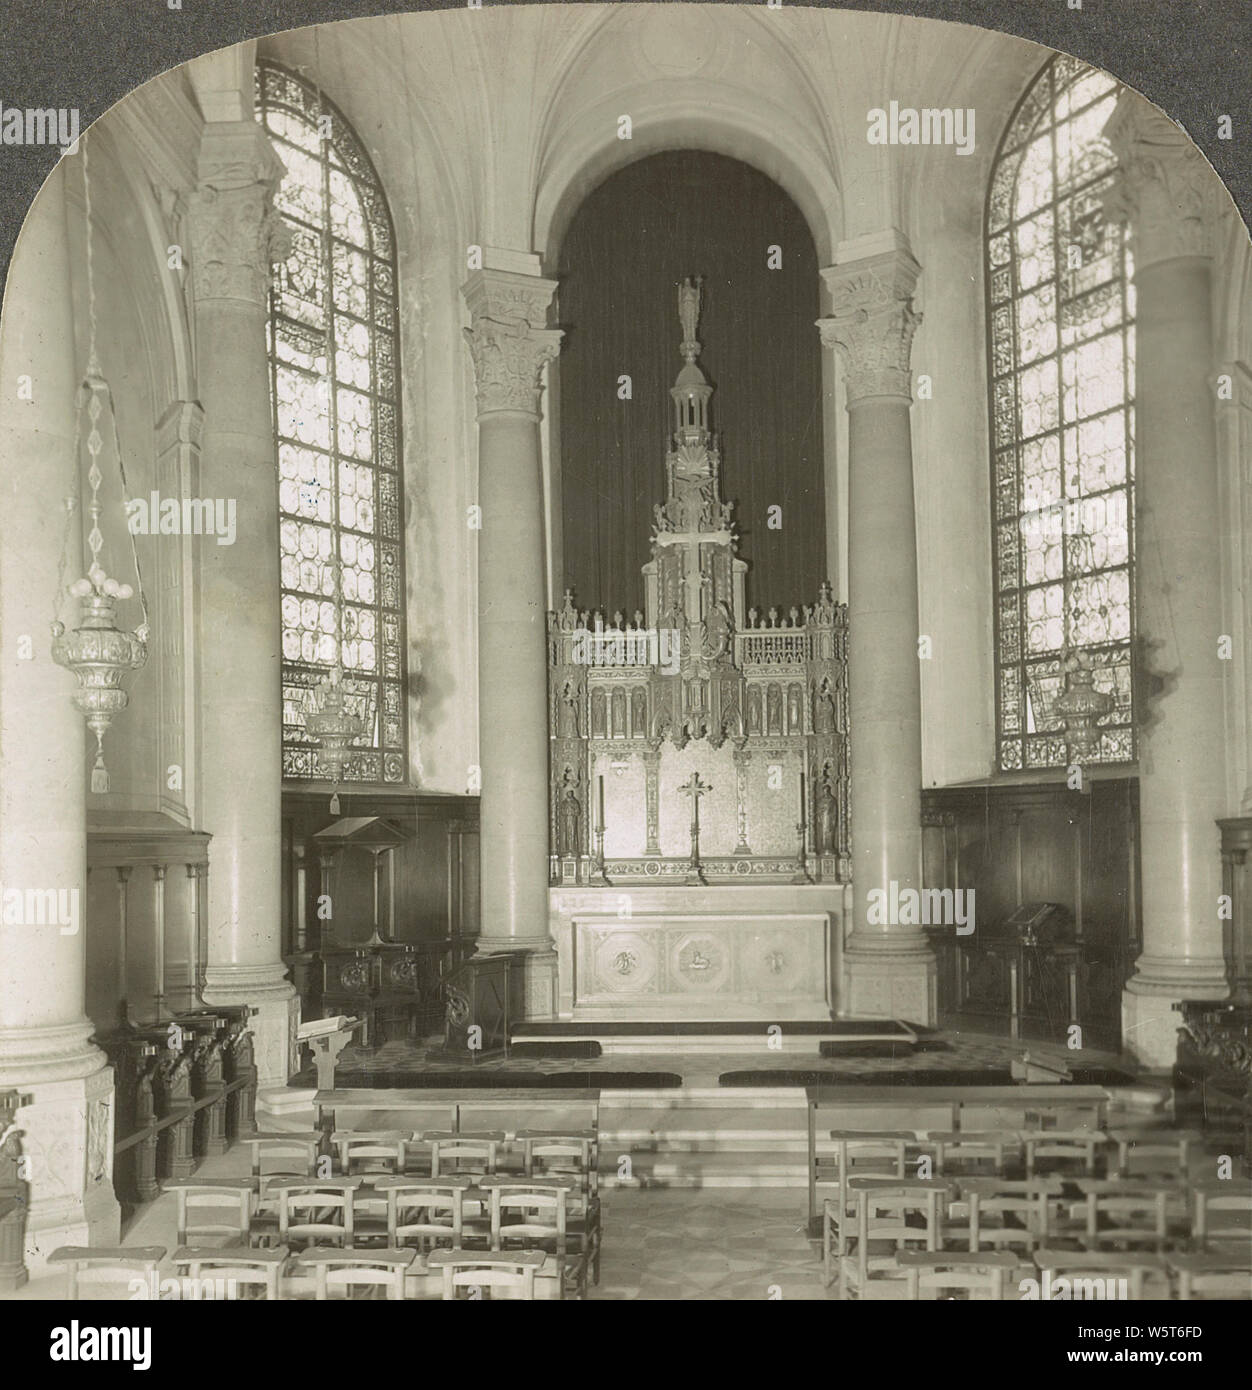 St. Ambrose Chapel, Cathedral of St. John the Divine, New York, N.Y. 1929. Stock Photo